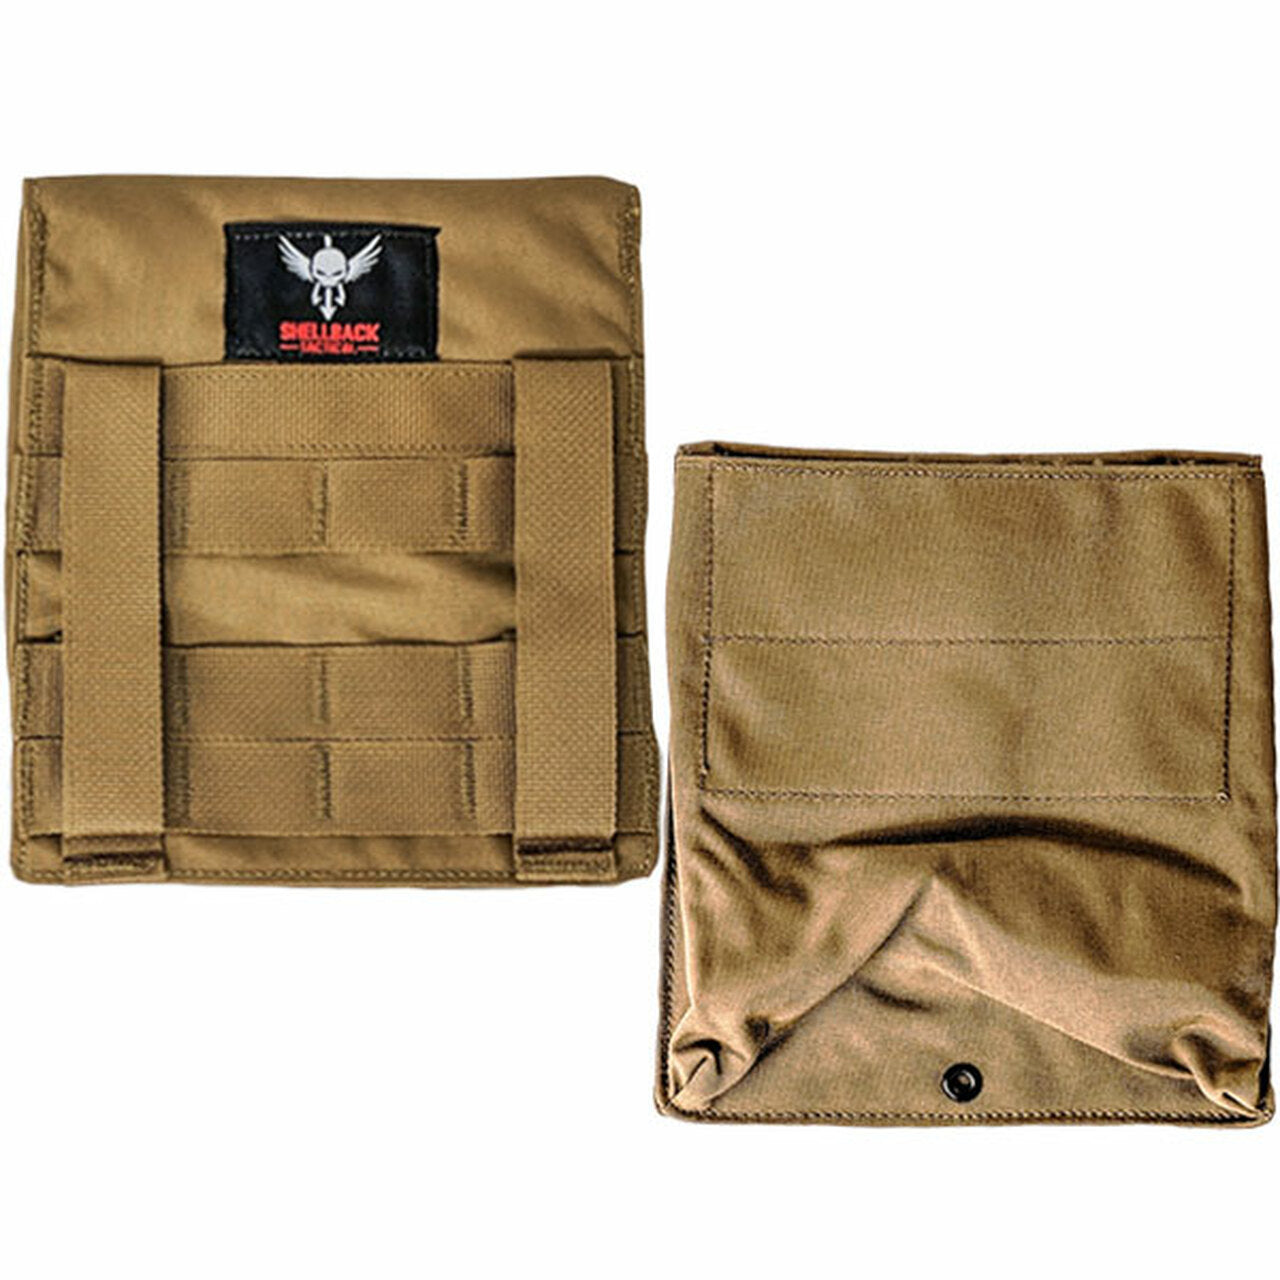 A Shellback Tactical Side Plate Pockets 2.0 - Set of 2 colored pouch with a red and black logo.